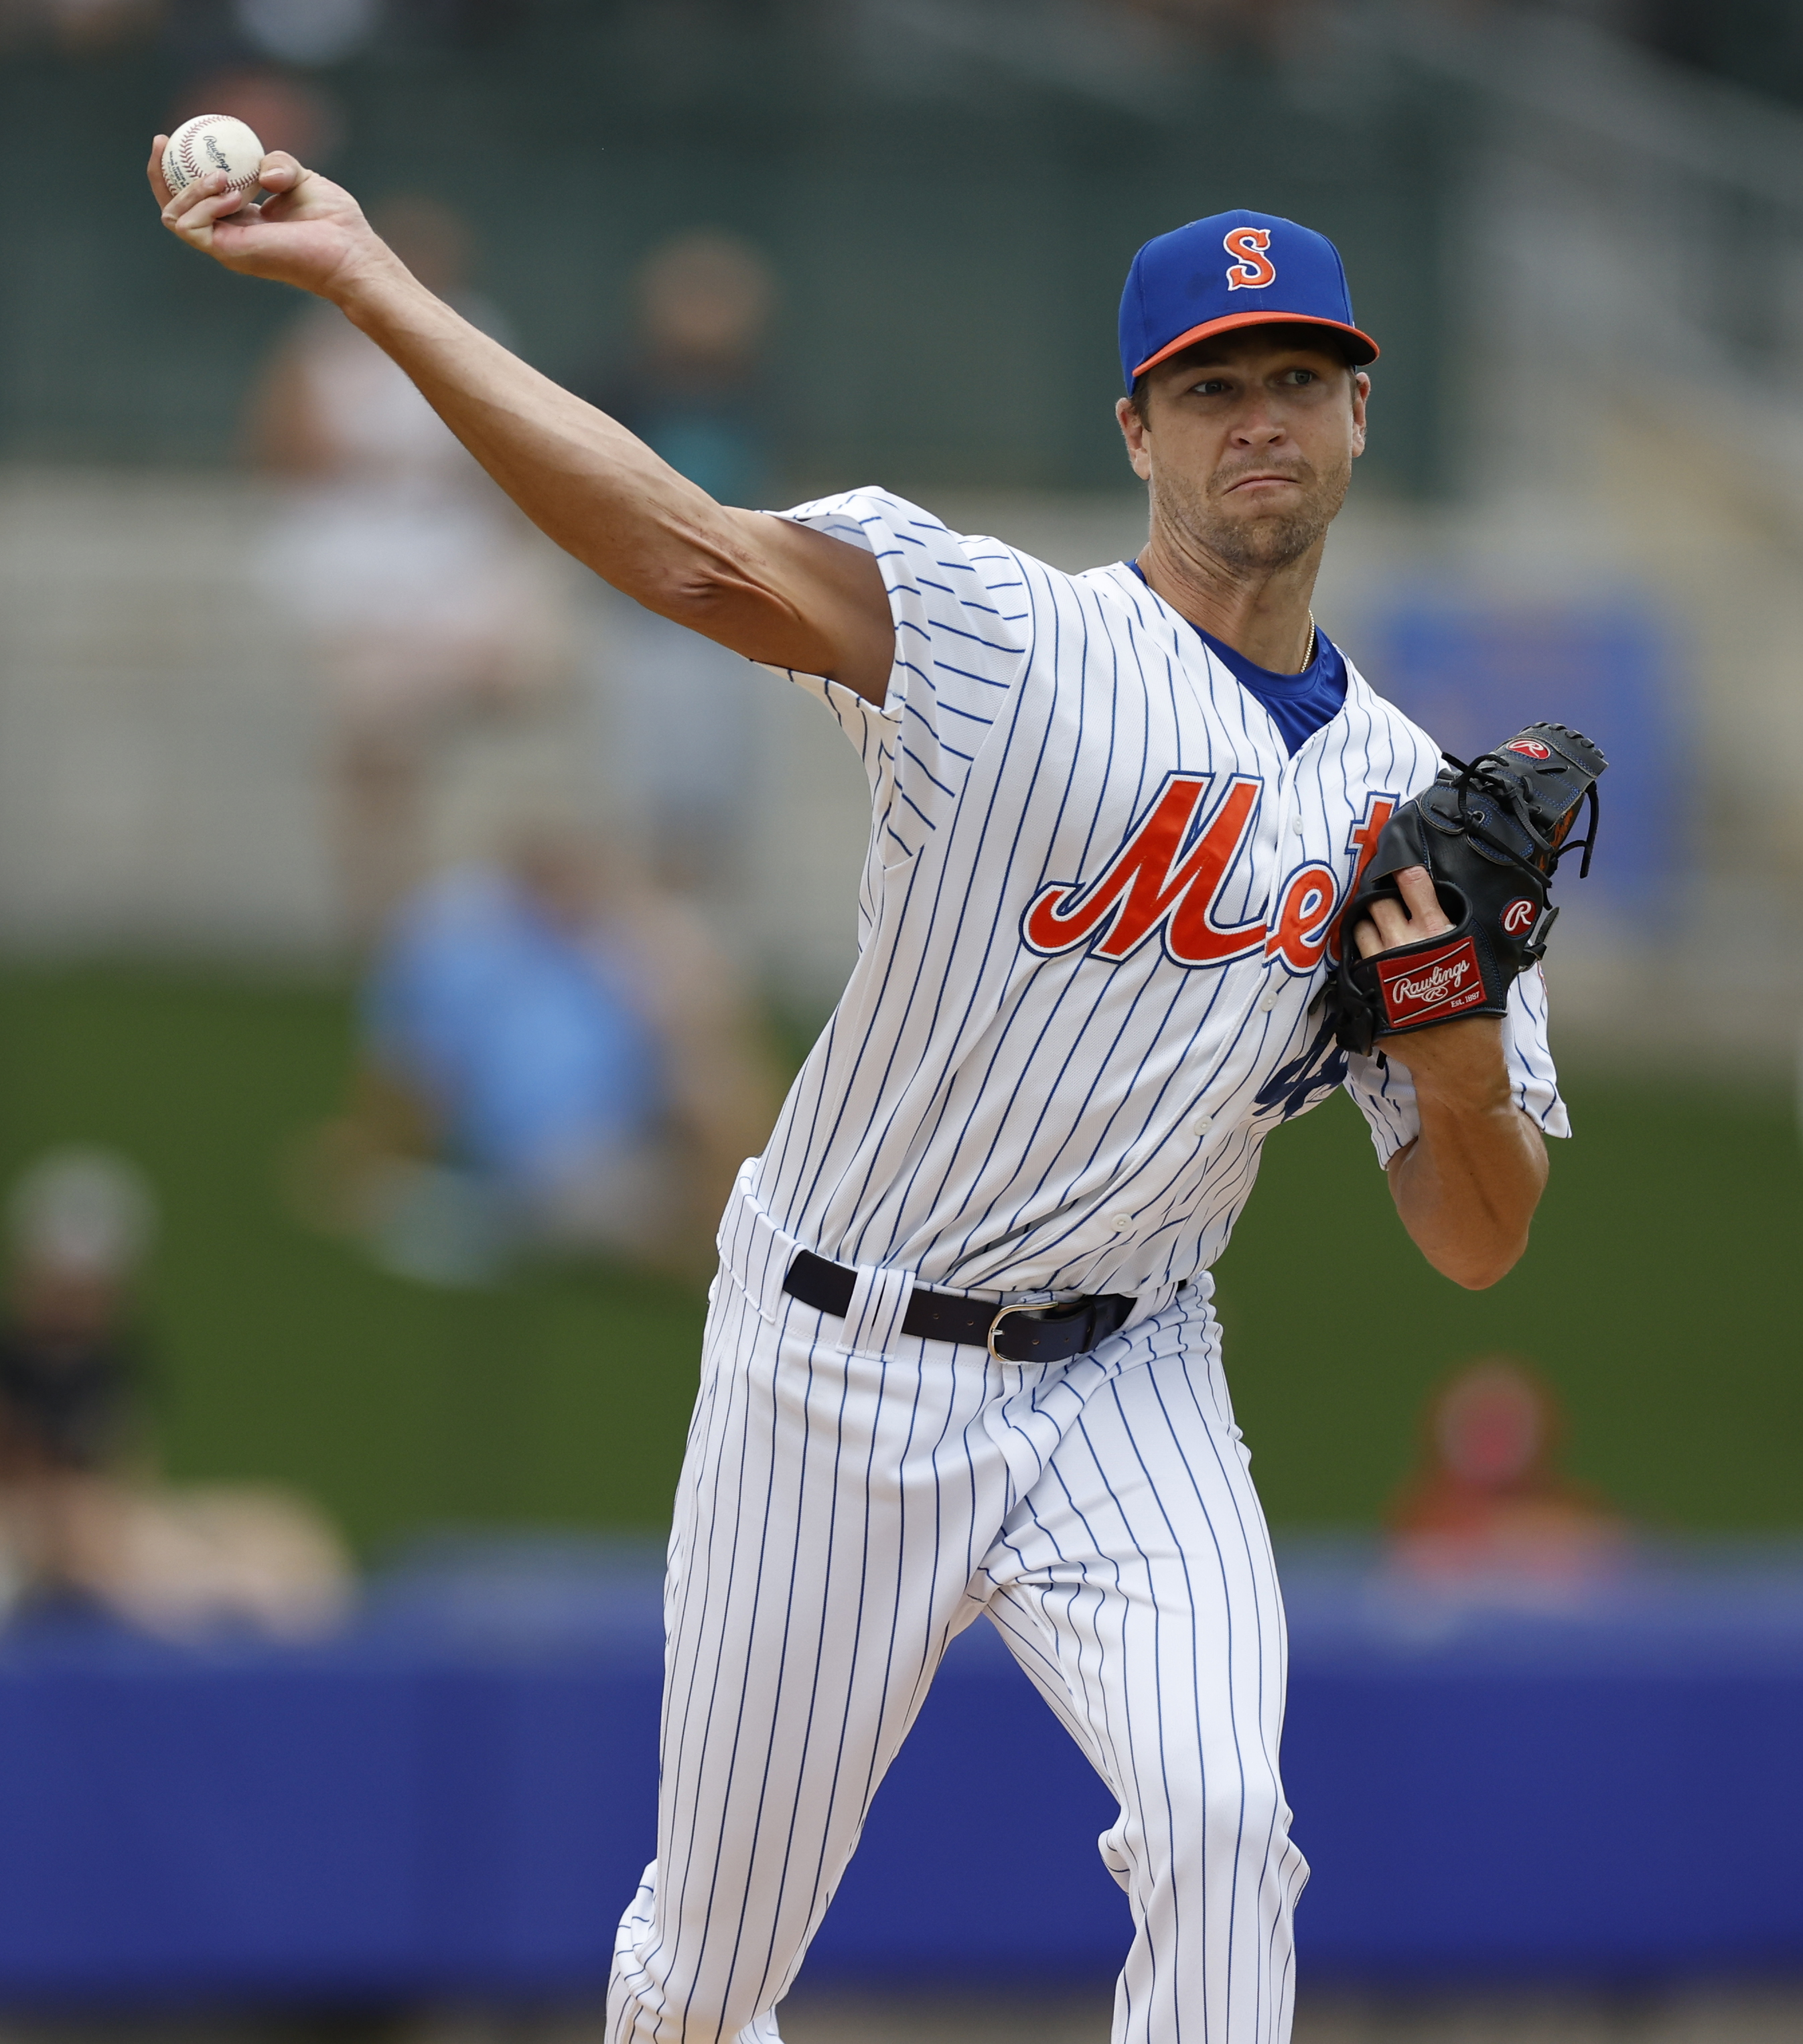 Shocker! Texas Rangers Sign Mets Ace Jacob deGrom To Five-Year Pact